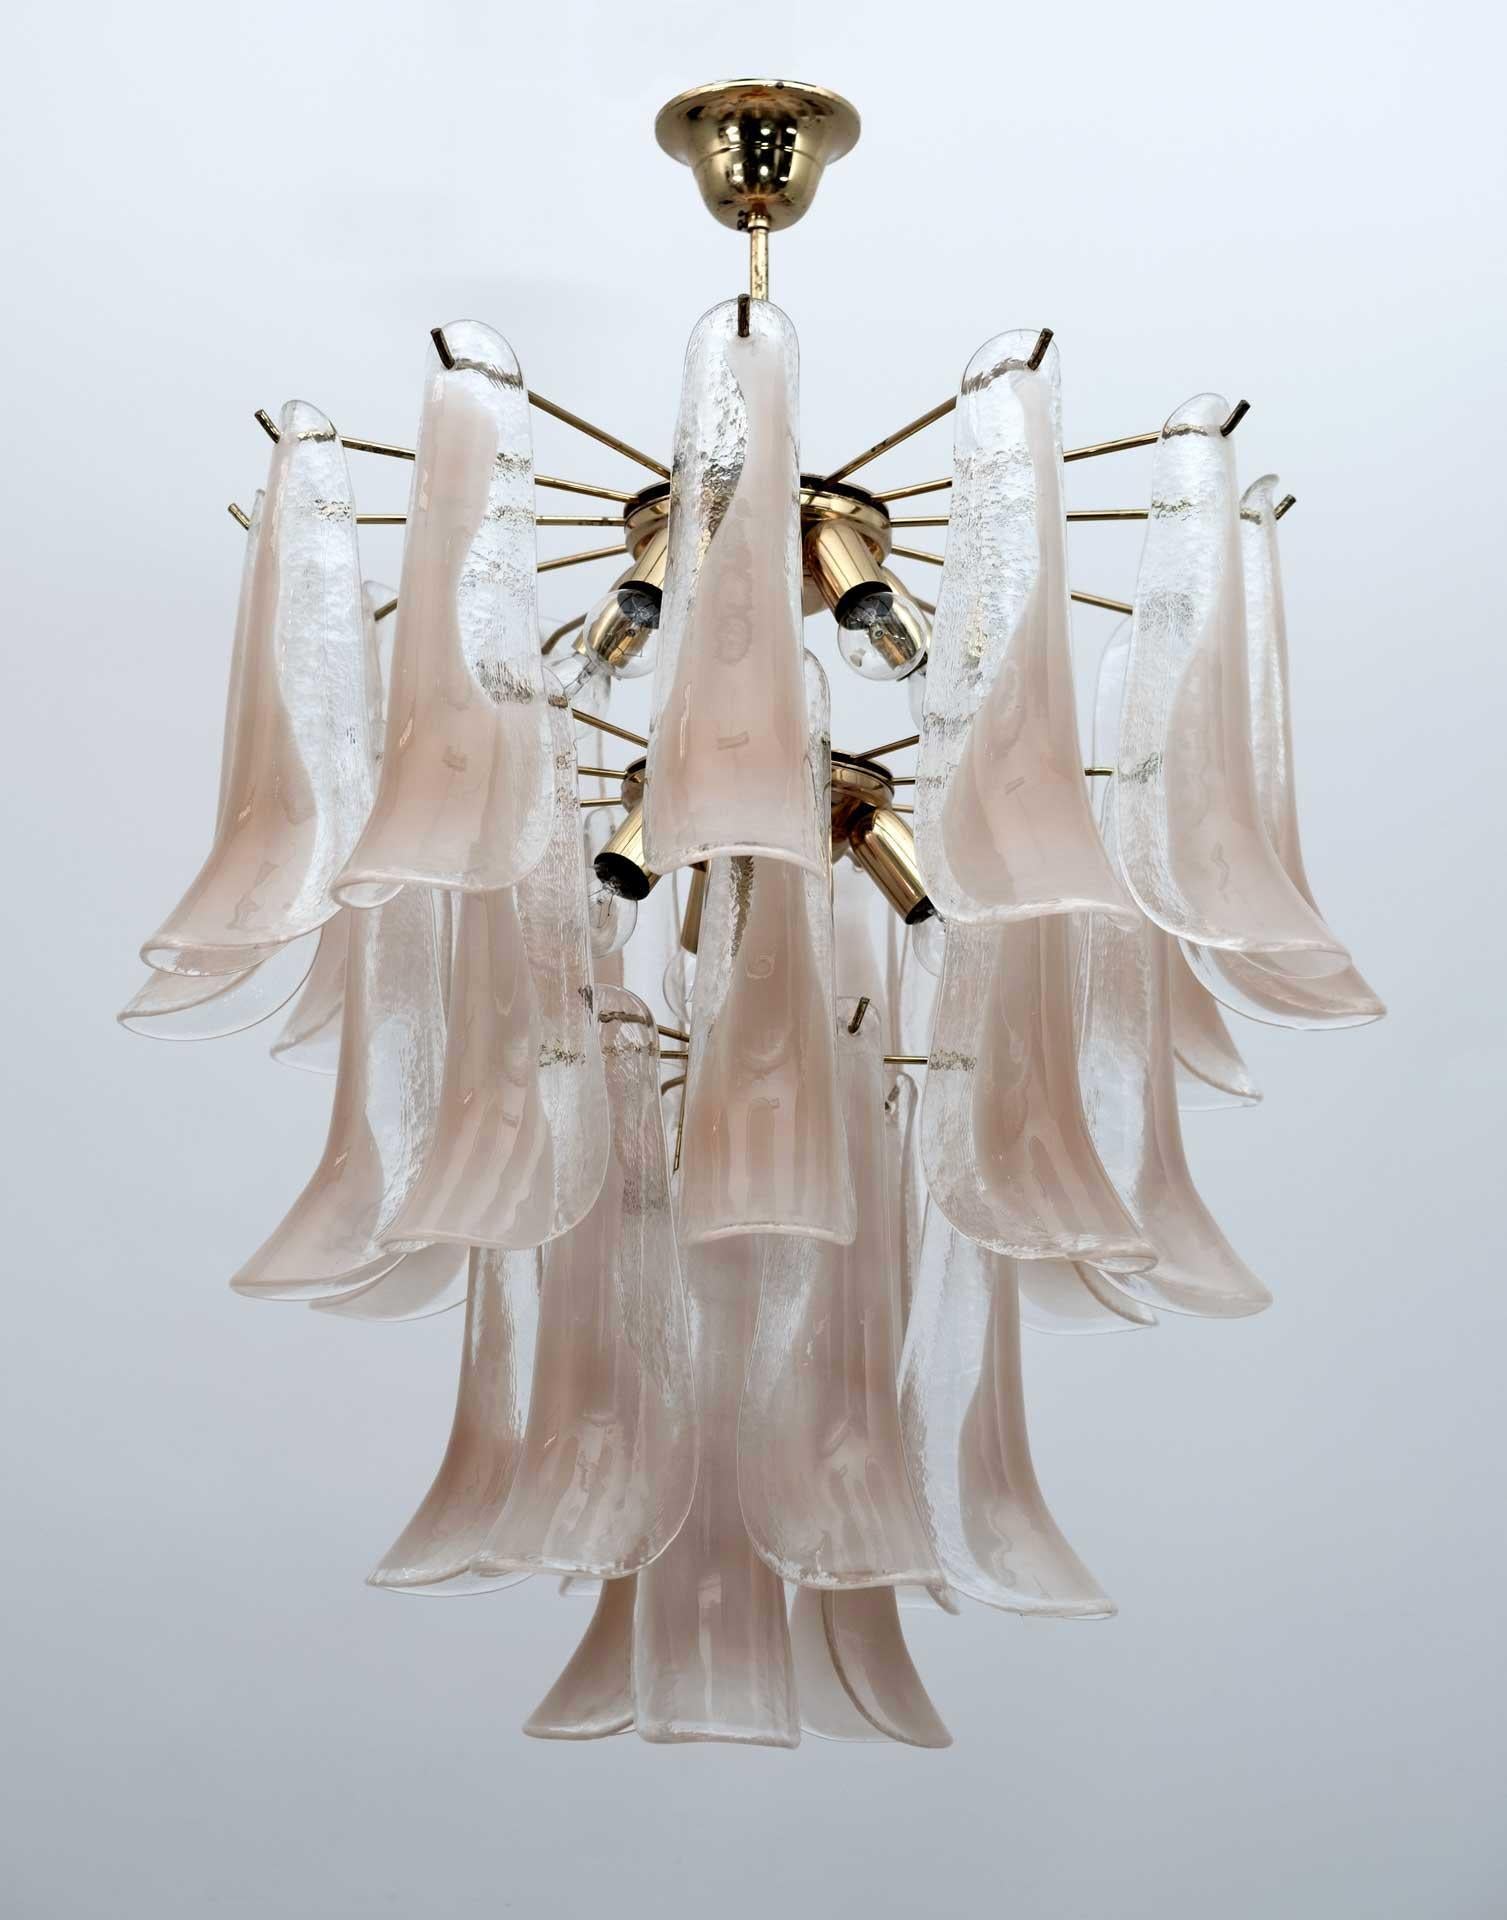 Murano chandelier produced by Mazzega, composed of 30 pink and transparent glass petals supported by a golden brass structure.
The clear, light pink color of the glasses creates a fabulous warm light effect.
Period: 70s
Dimensions: 85cm high with